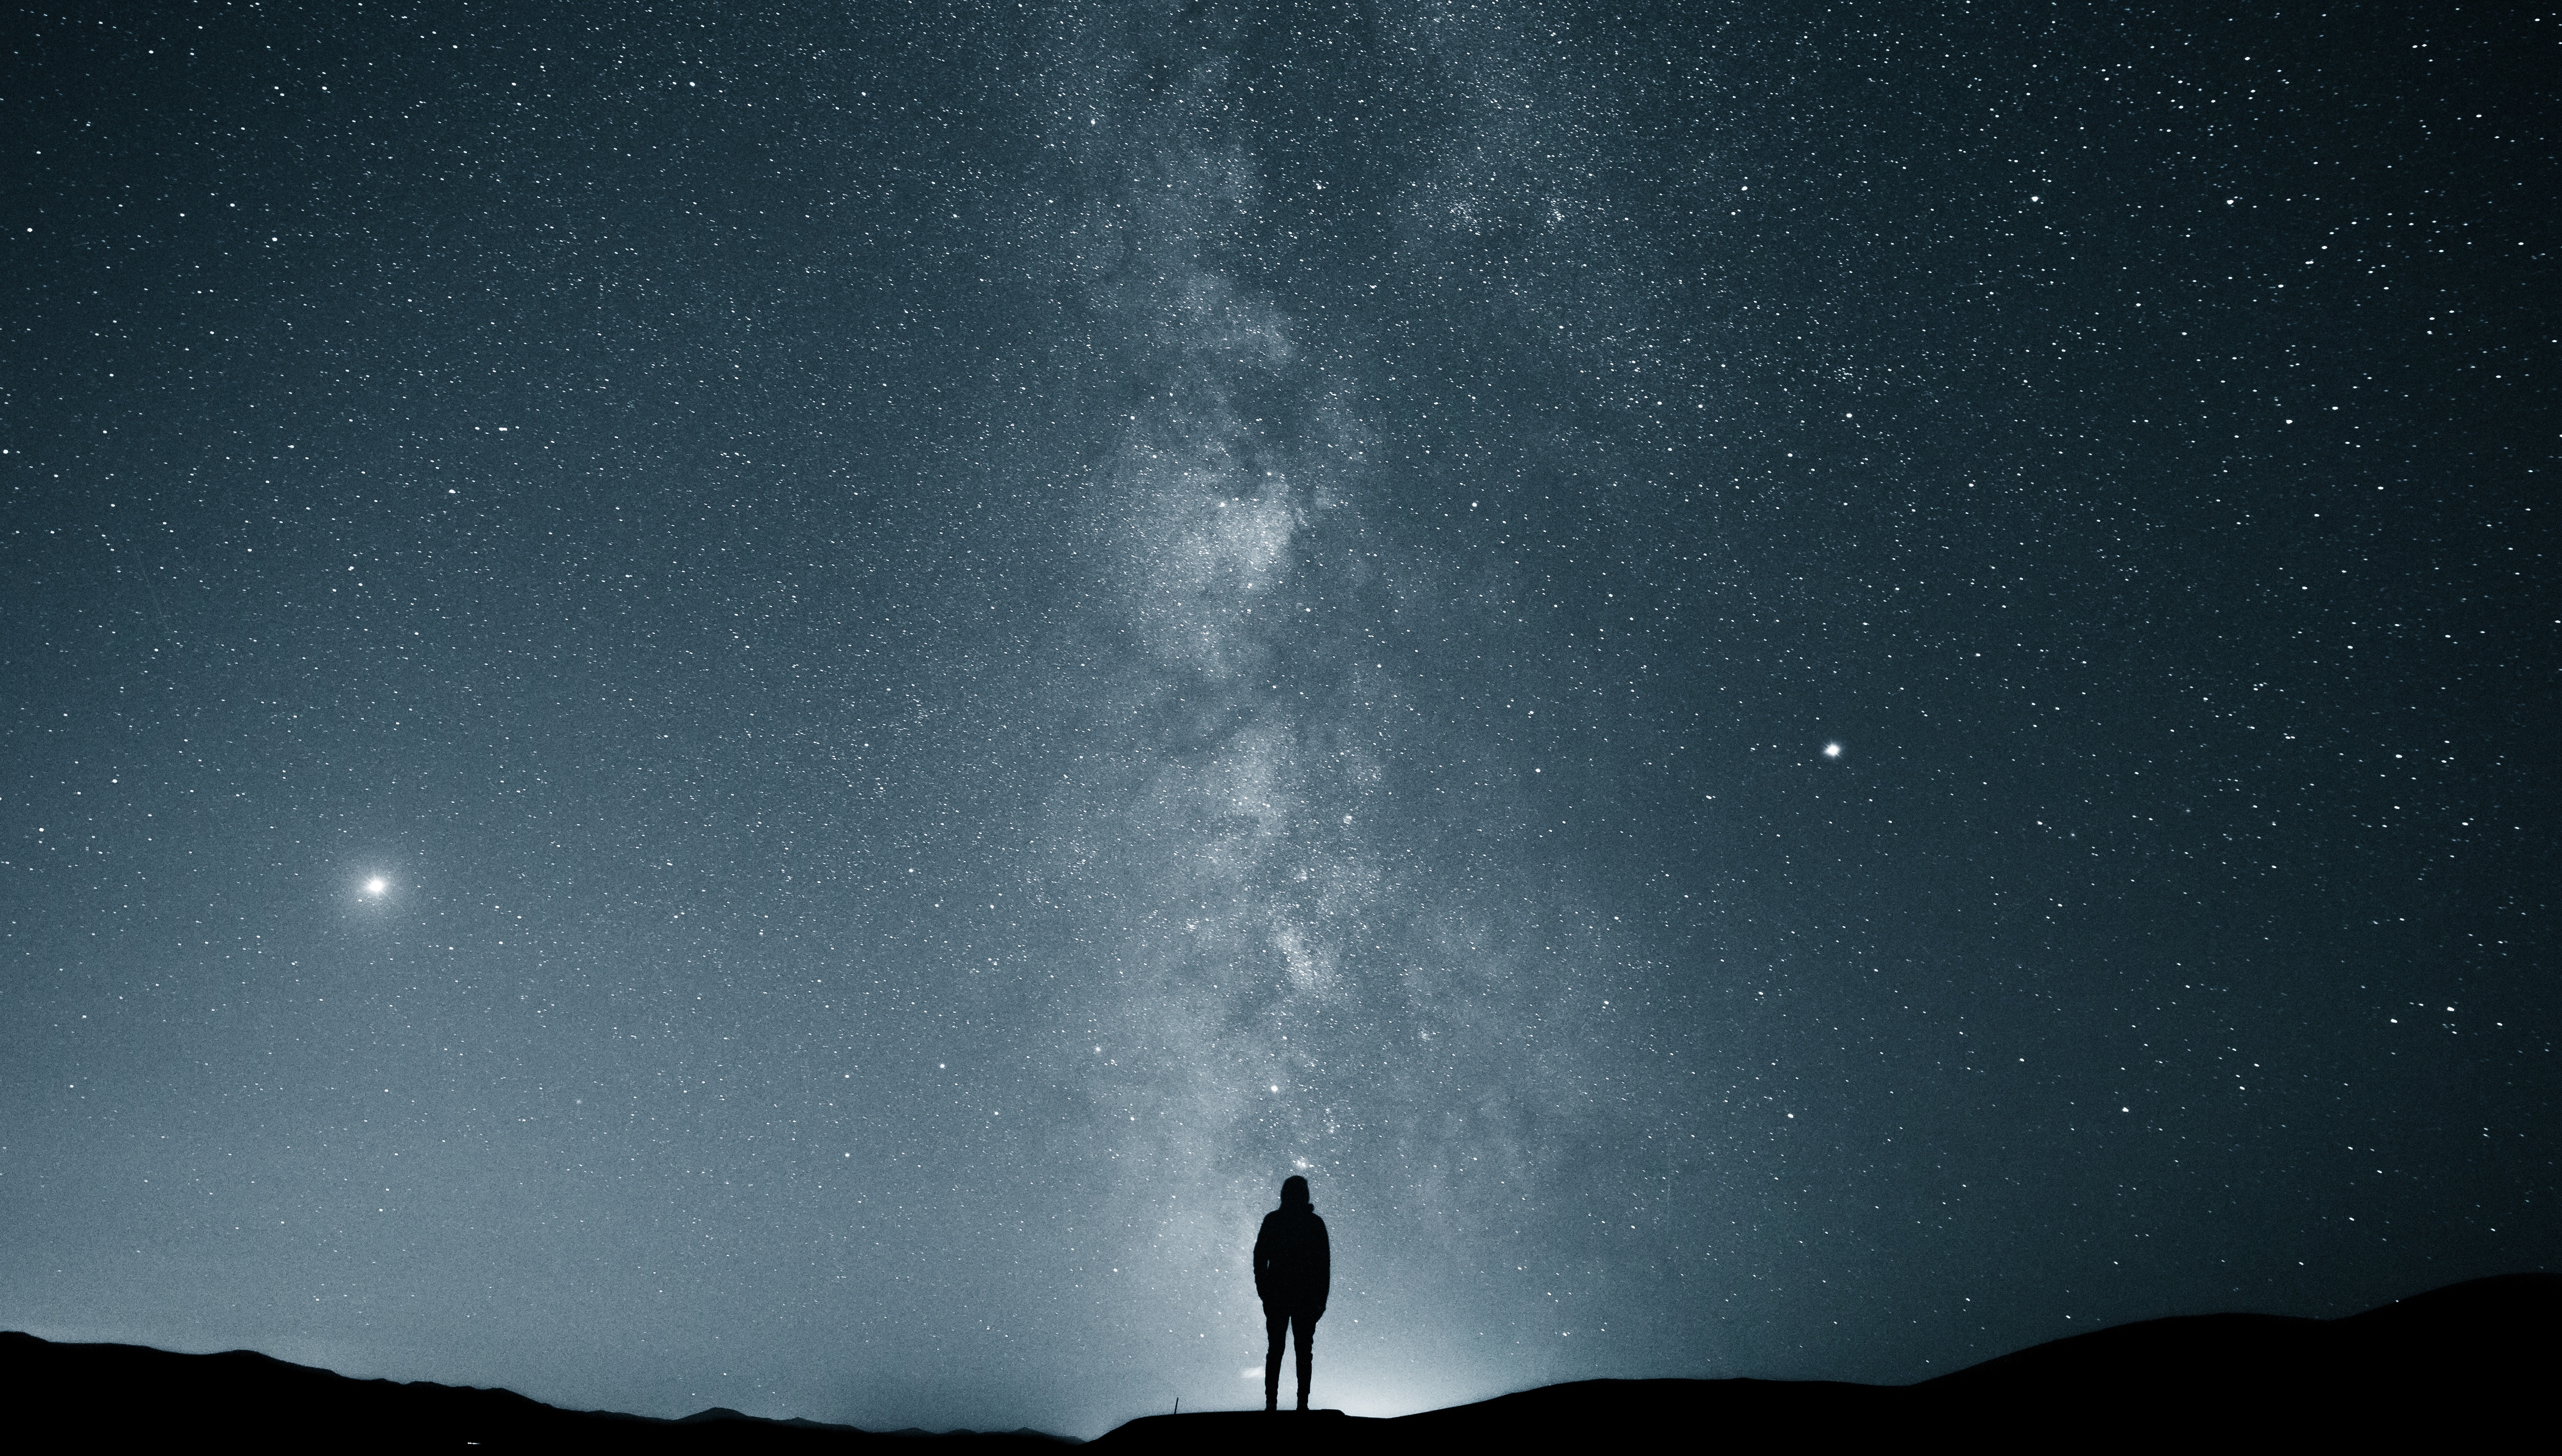 loneliness, privacy, dark, seclusion, brilliance, starry sky, shine, silhouette